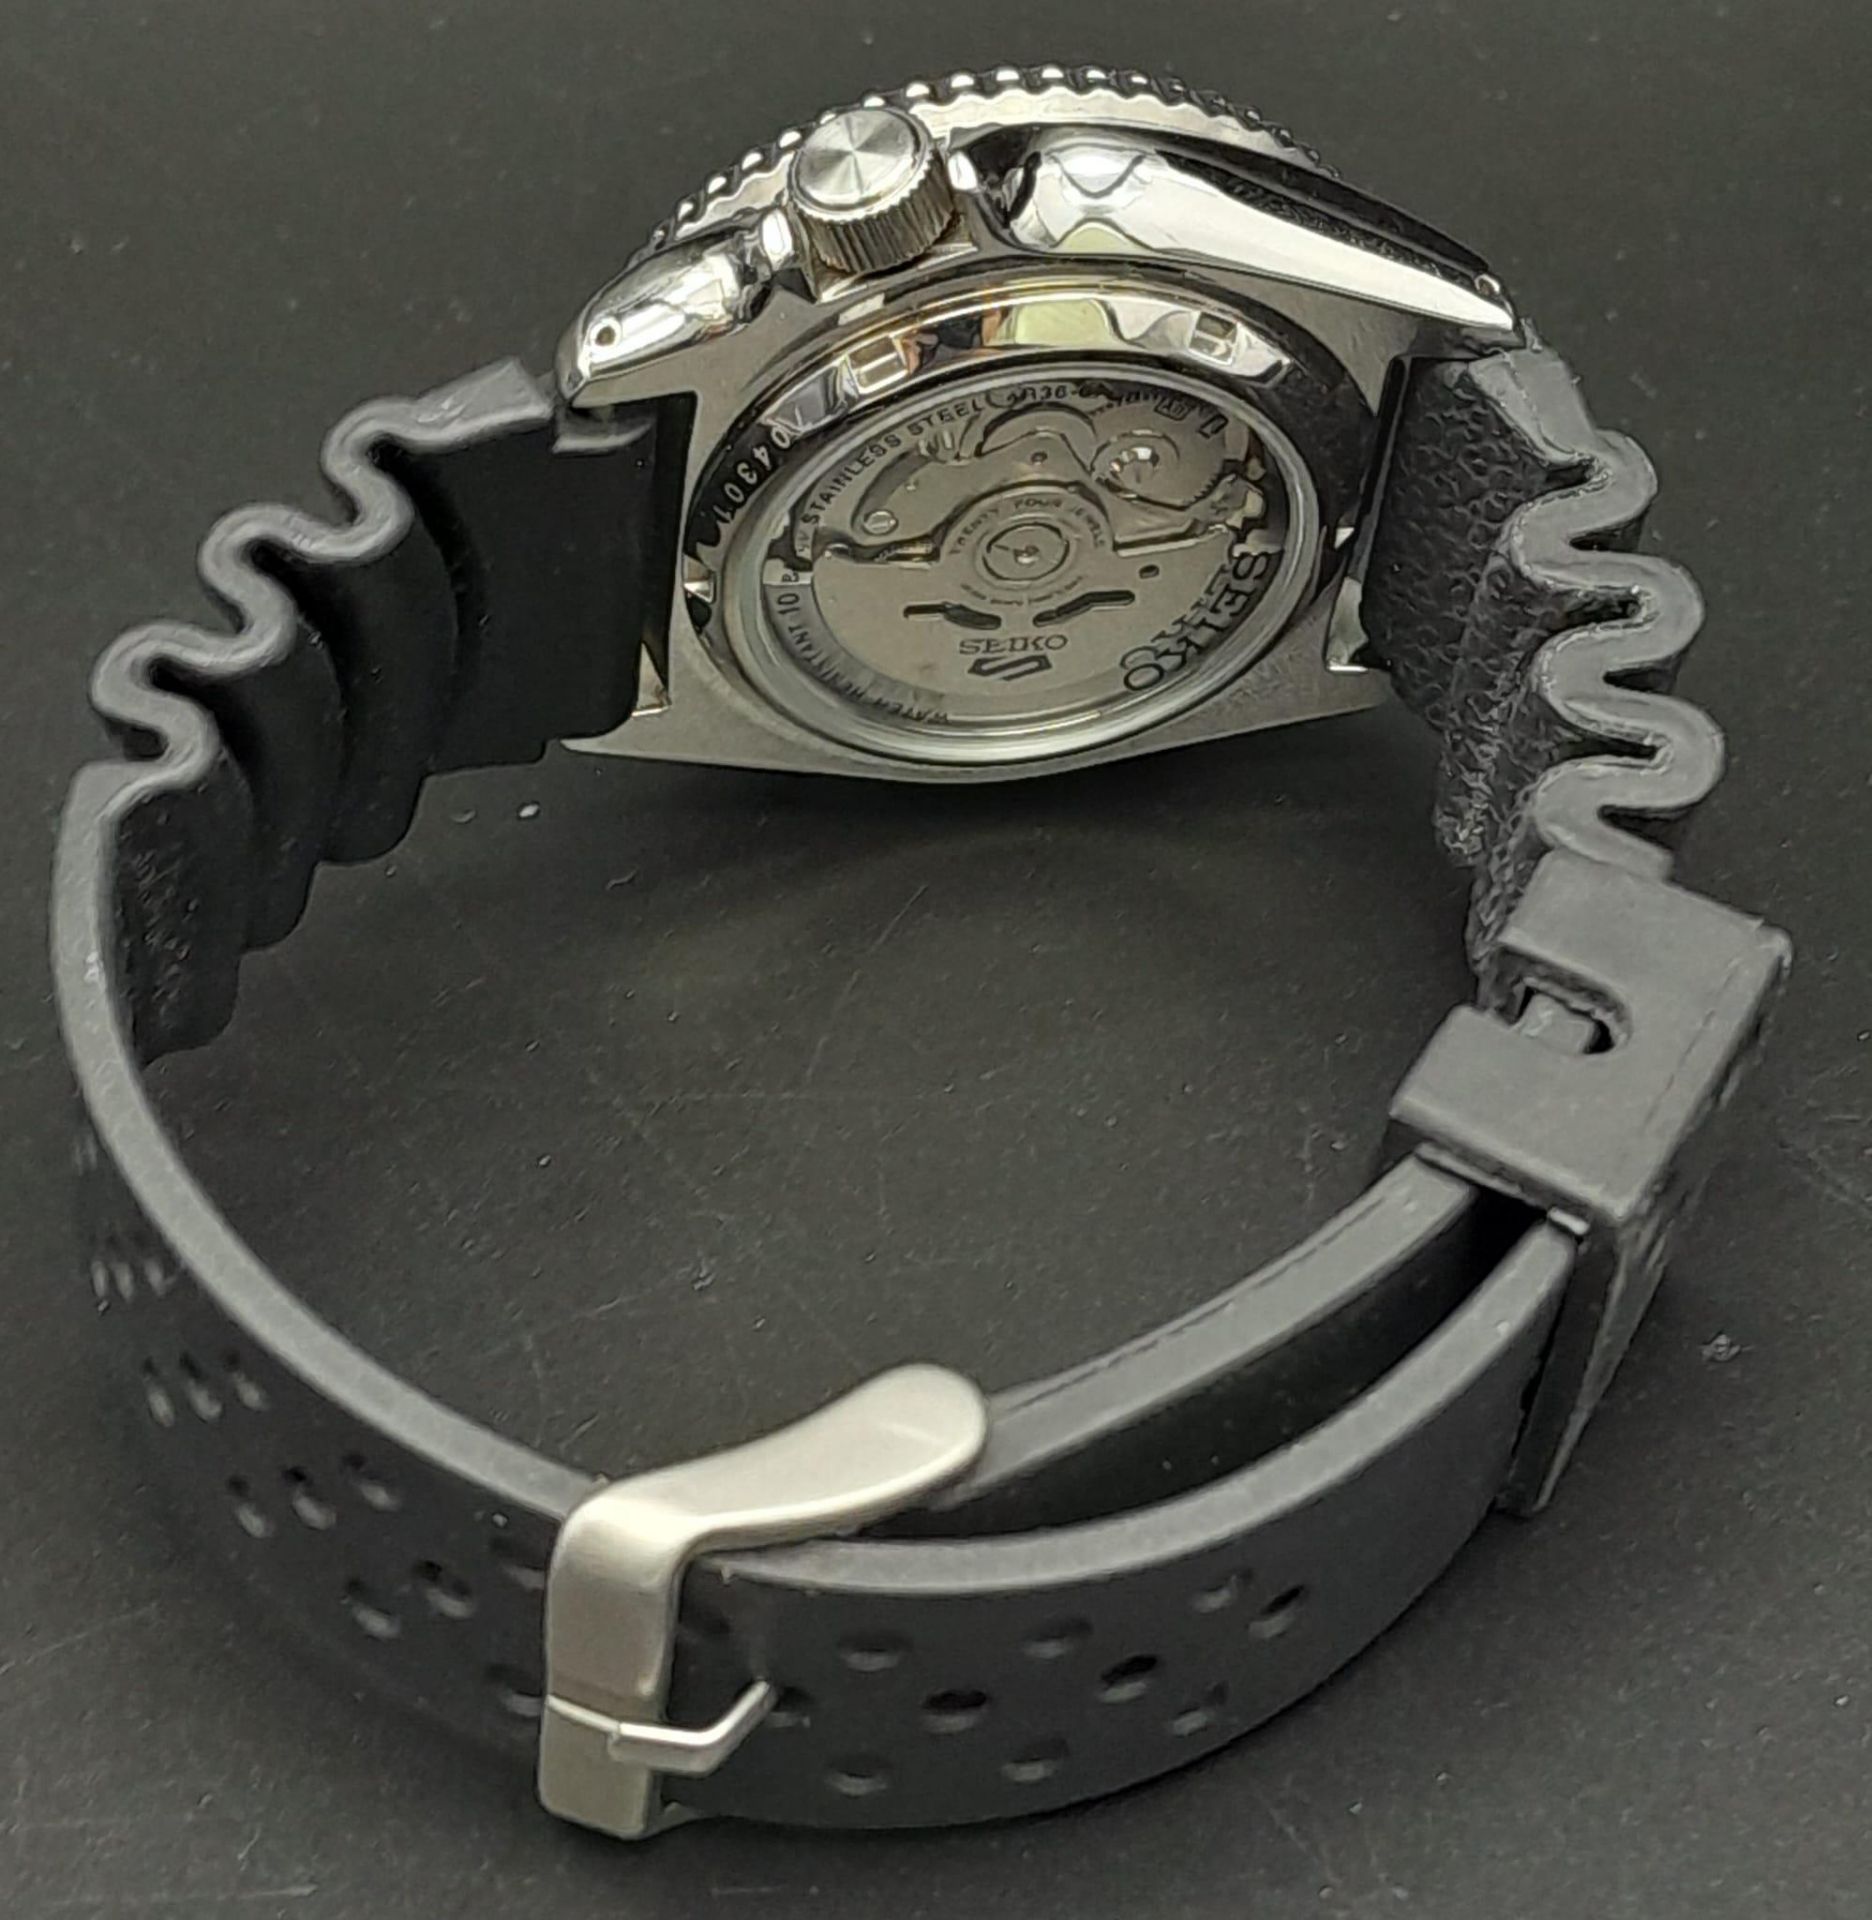 A Vintage Seiko Automatic Gents Watch. Black rubber strap. Stainless steel case with movable bezel - - Image 5 of 11